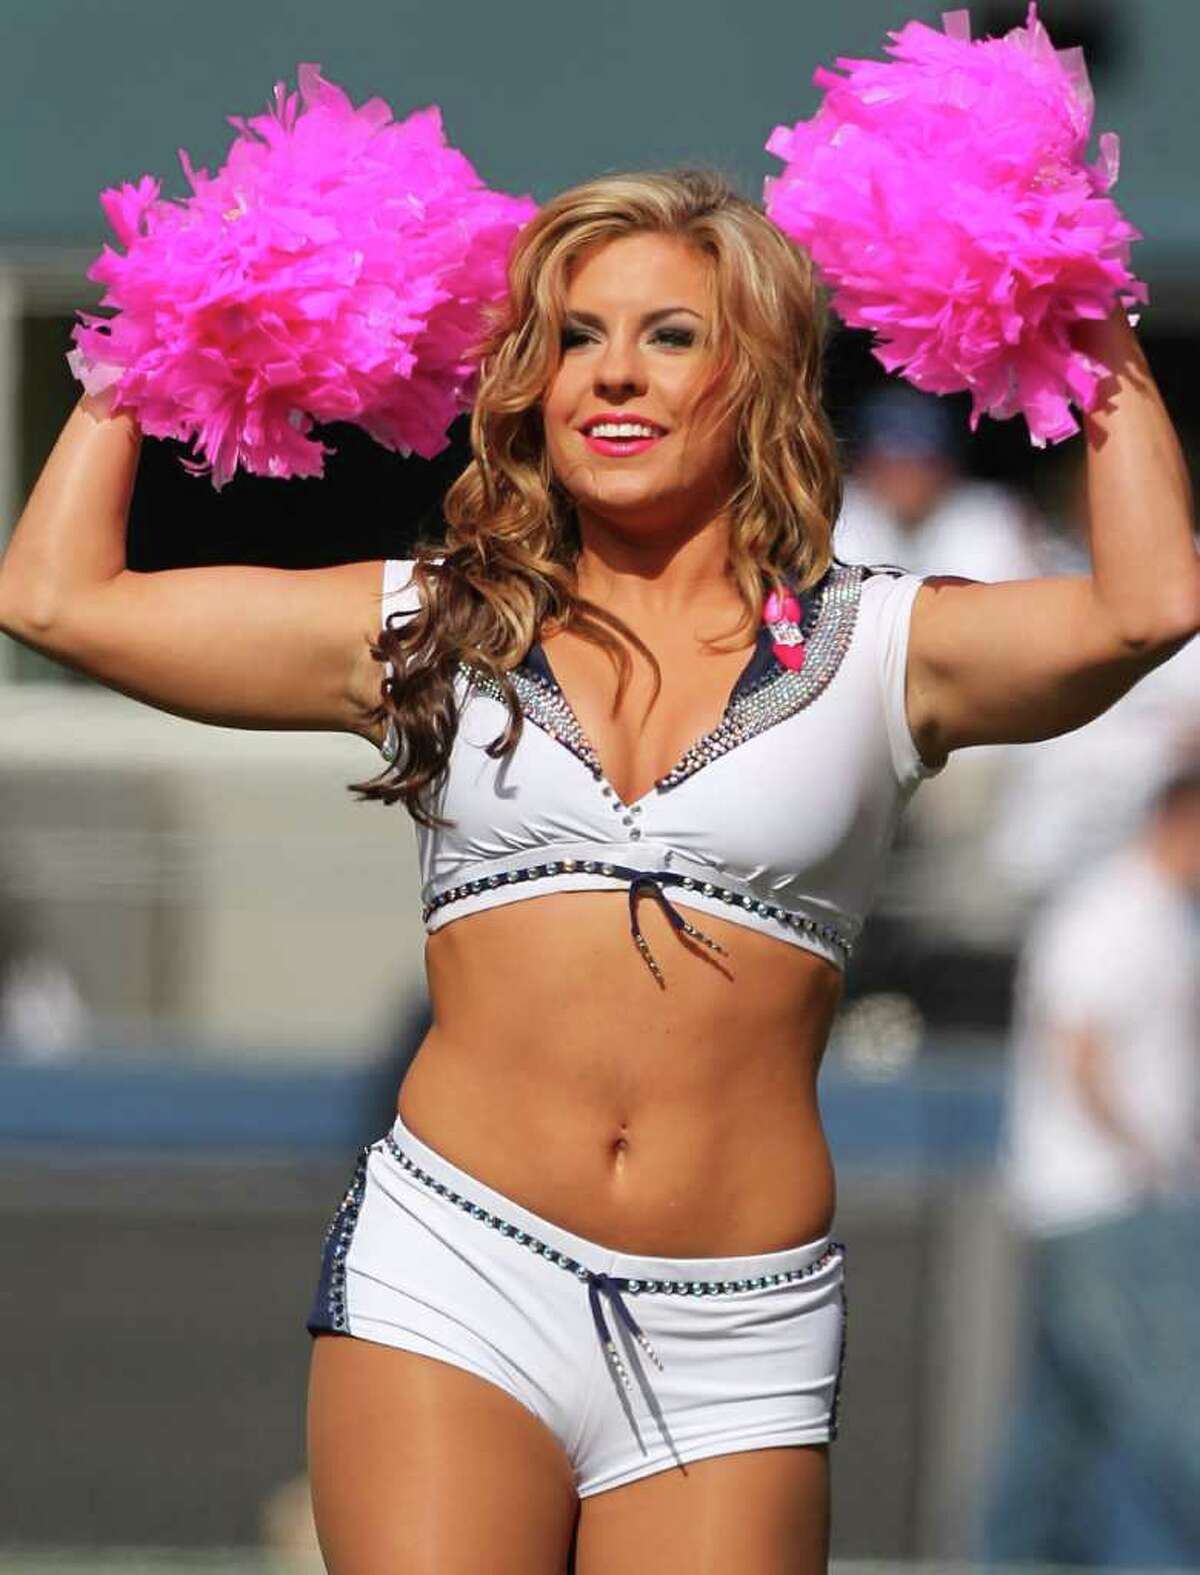 While Seattle's professional football team hasn't quite delivered this season, its cheerleaders certainly have. The fan-favorite Sea Gals are the one thing the patrons at CenturyLink Field can count on, and they haven't disappointed in 2011.